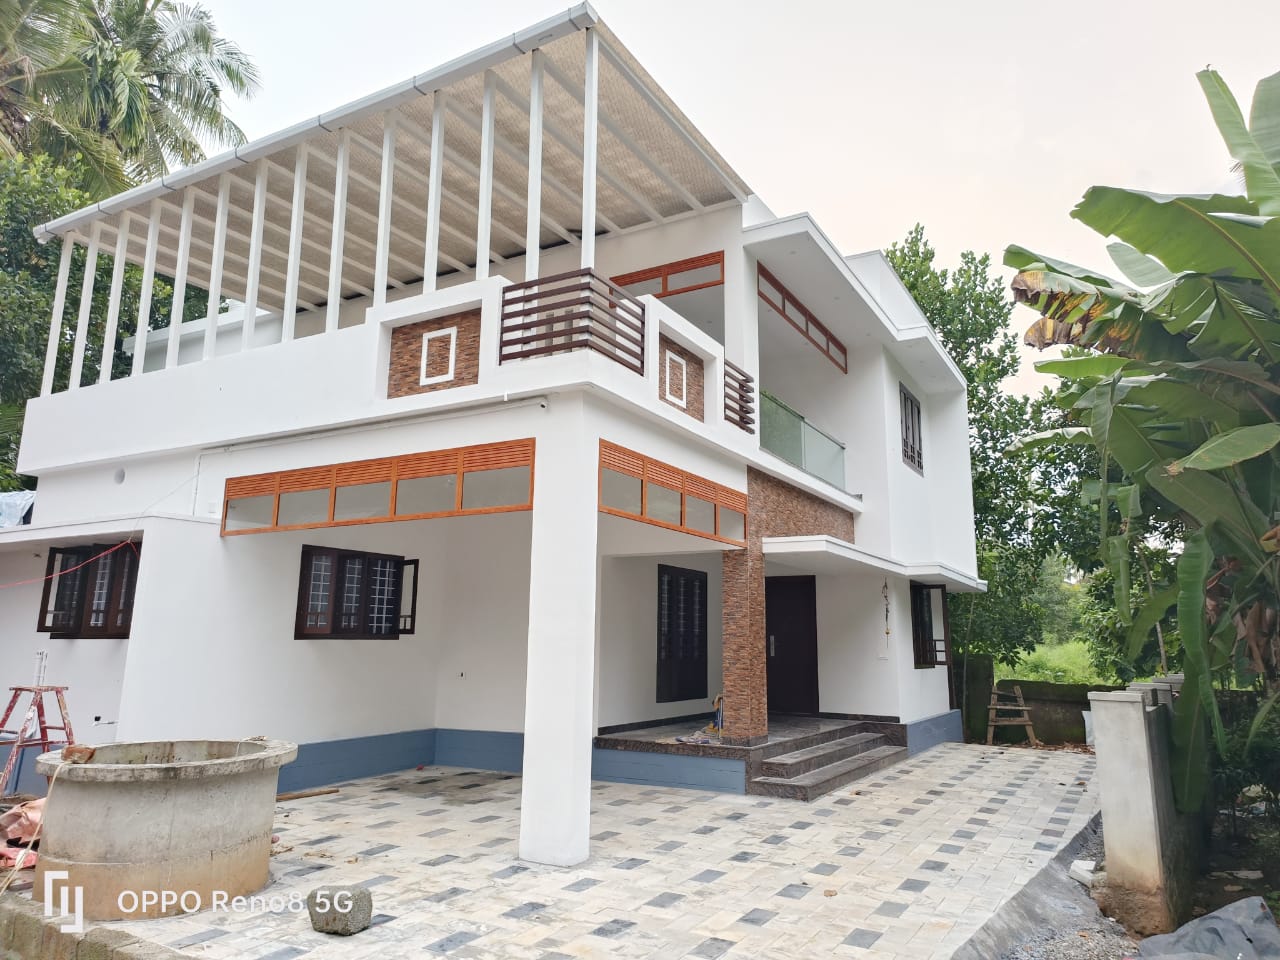 2270sqft ,6 cent house ,4 km from Thrissur town